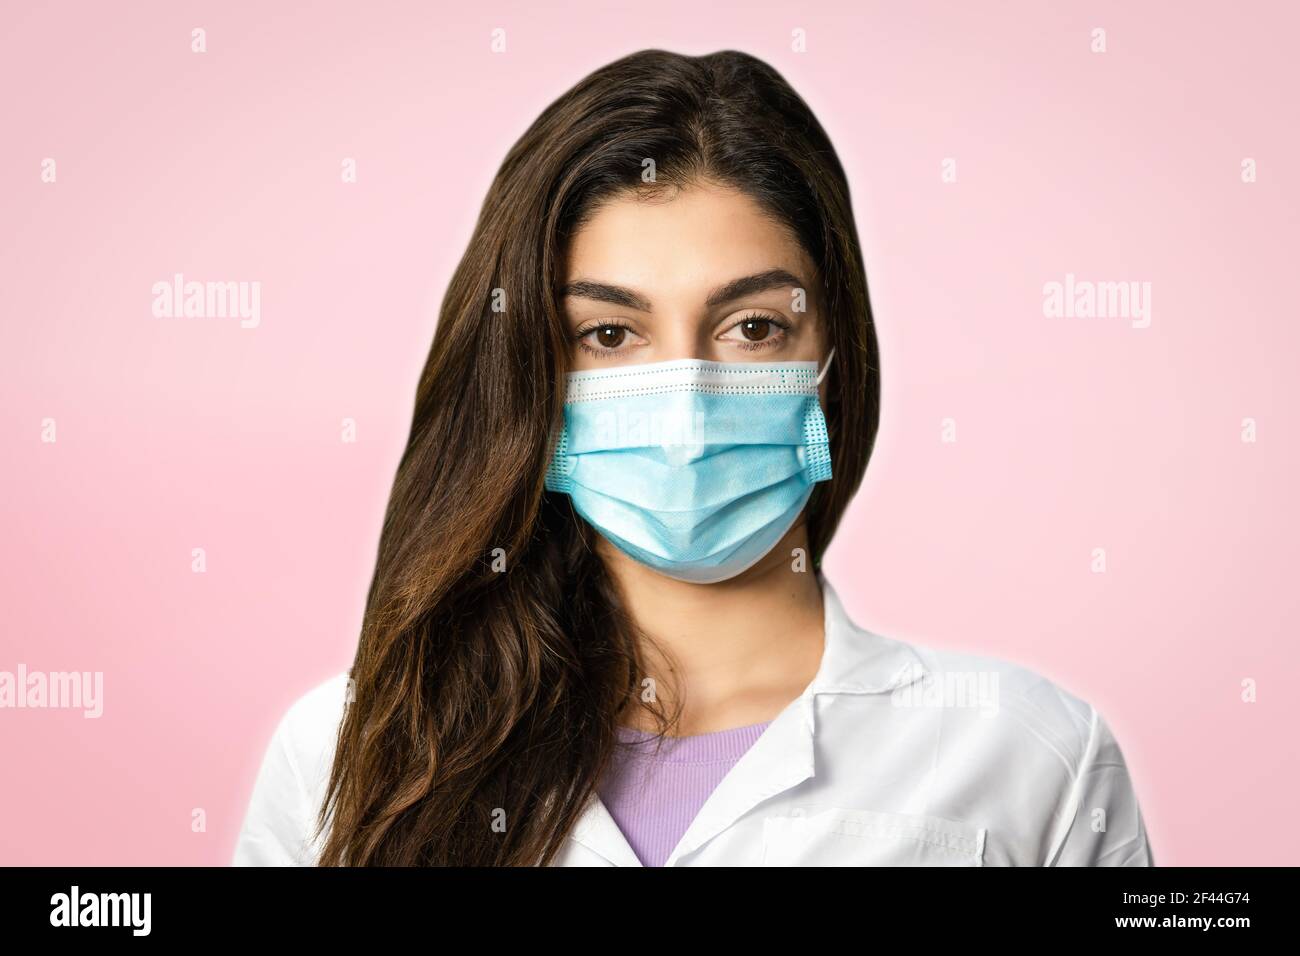 A scientific researcher in a surgical gown and mask. In a pink background. Perfect shot for pandemic, research, vaccine and security. Stock Photo